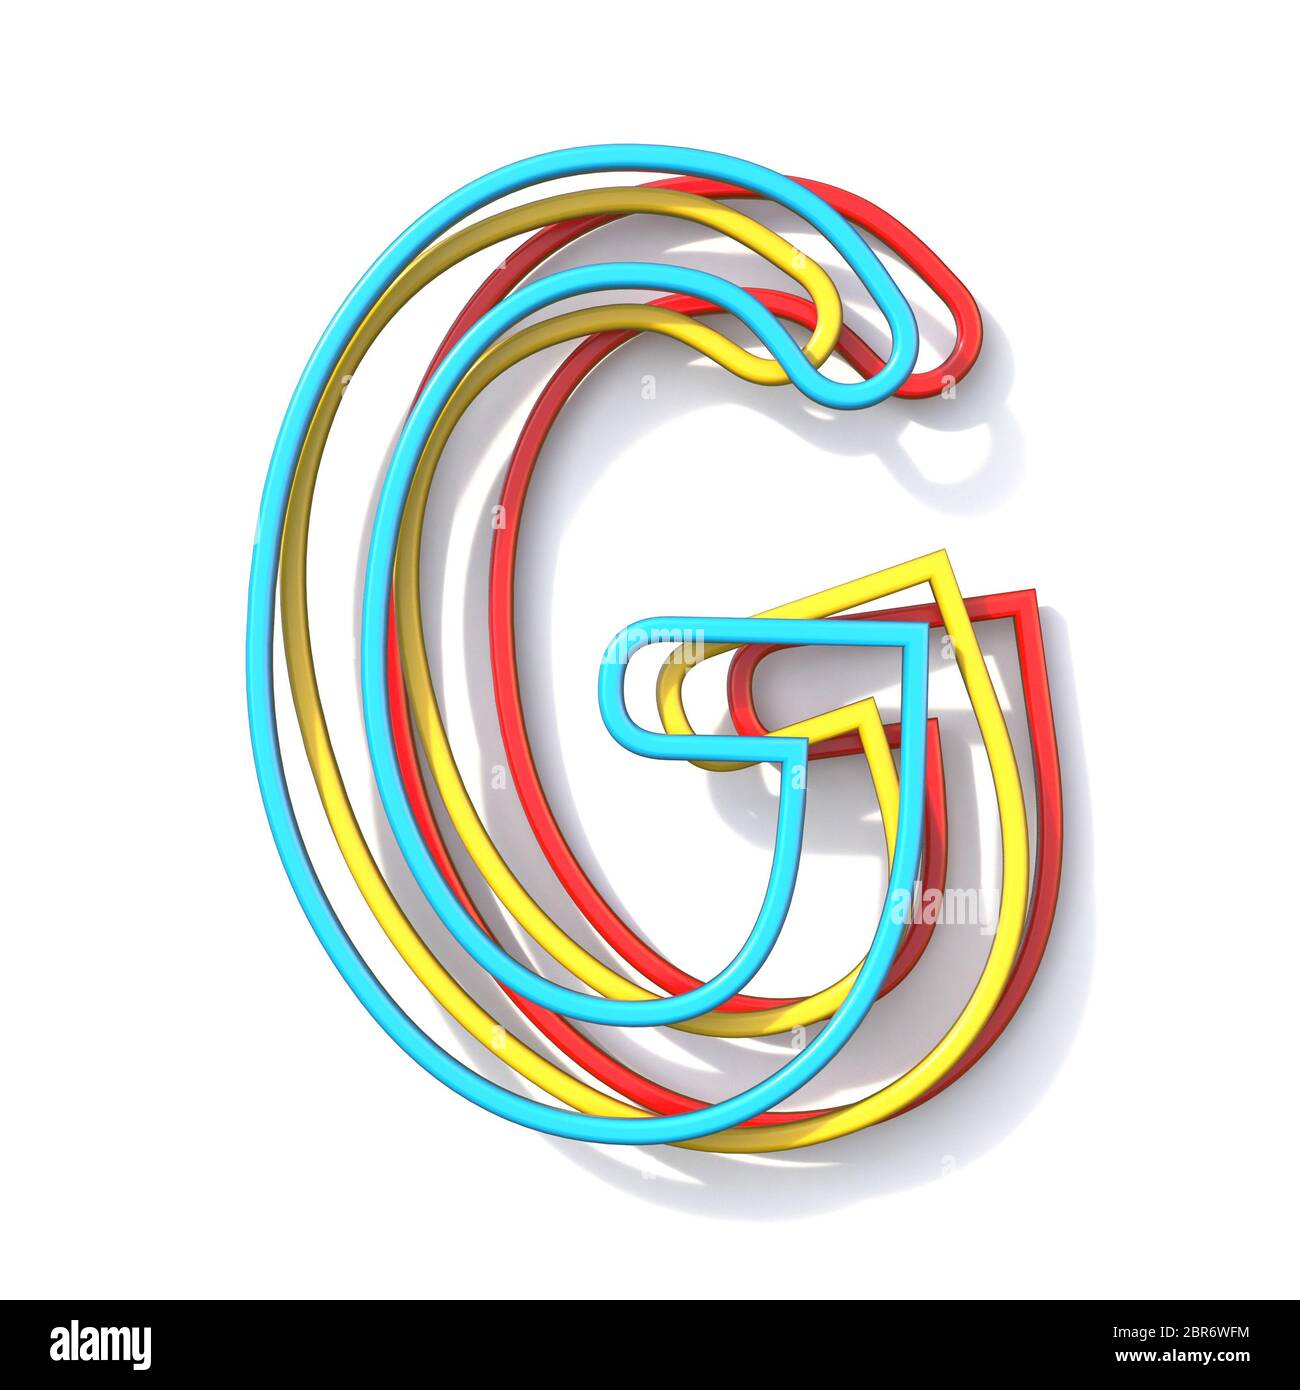 Three basic color wire font Letter G 3D rendering illustration isolated on white background Stock Photo